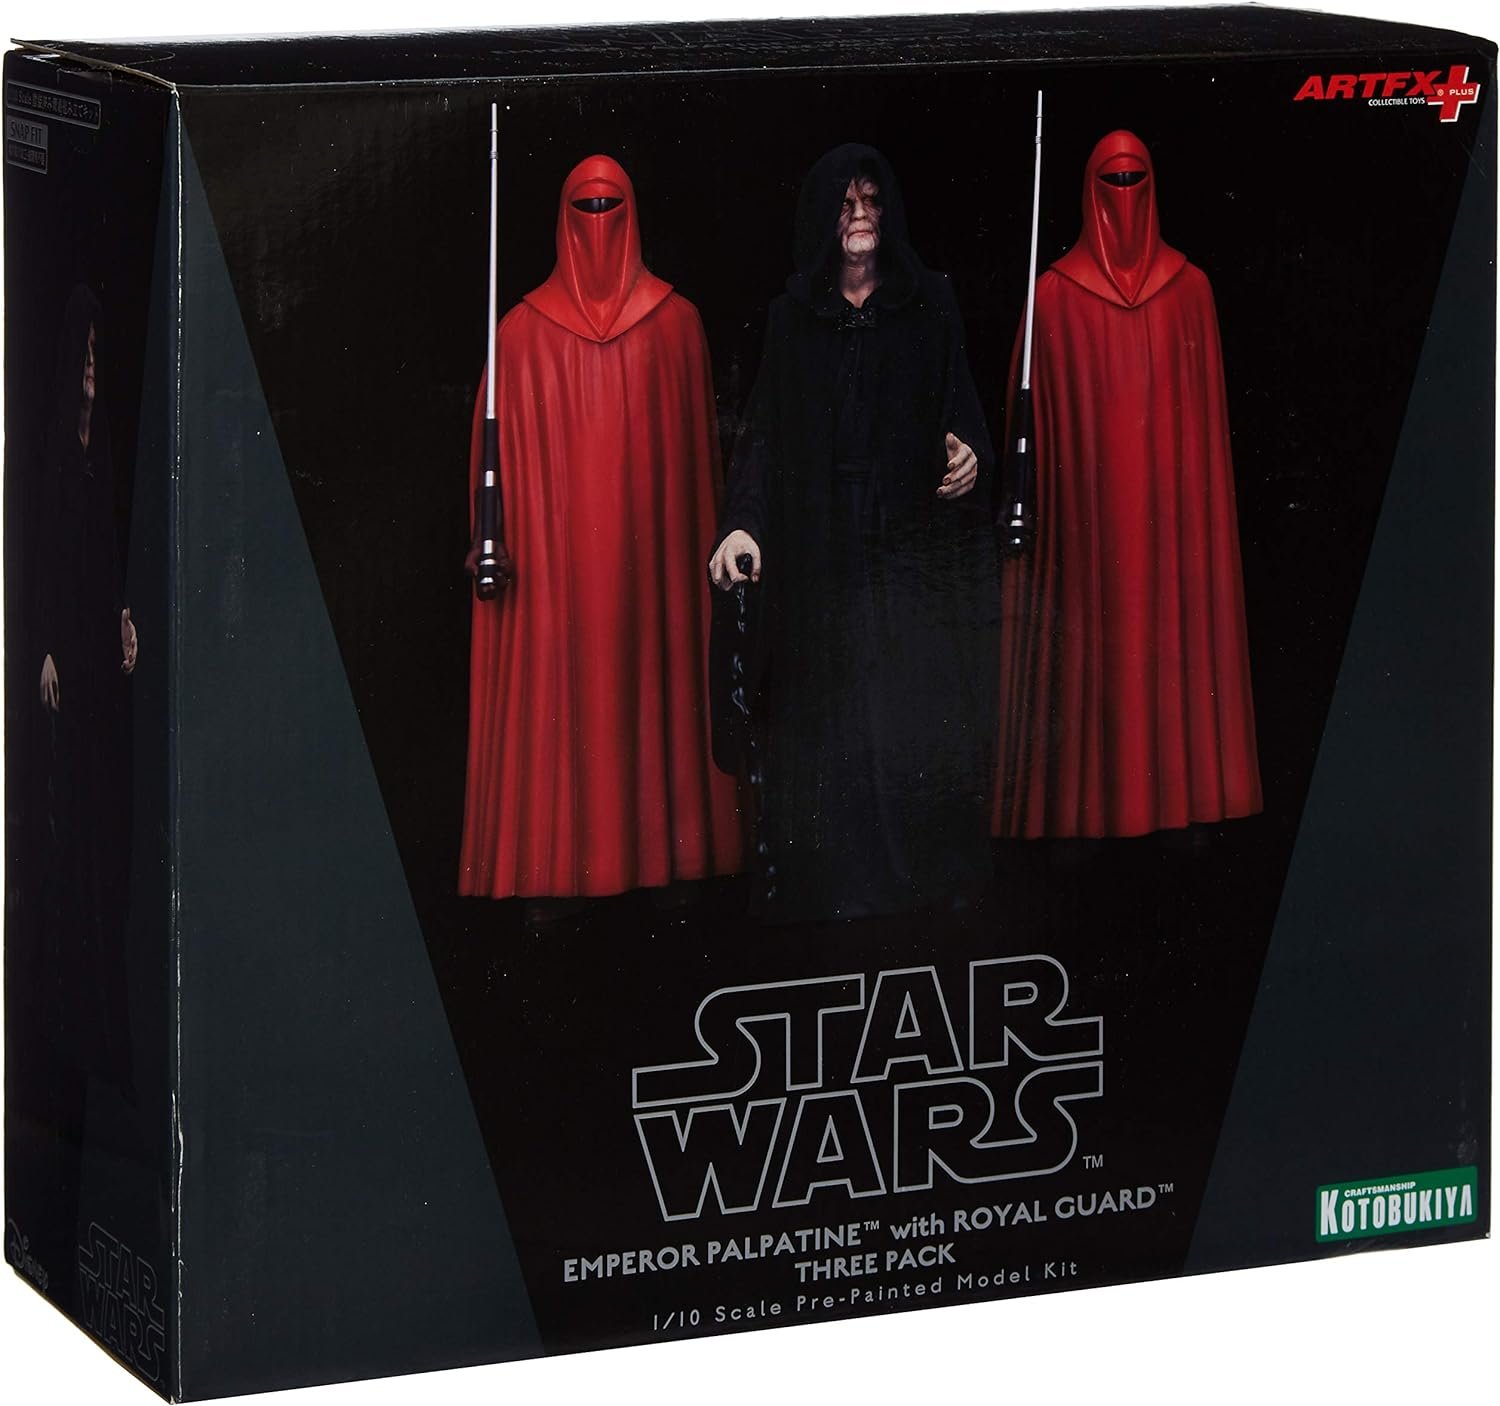 Star Wars Emperor Palpatine Royal and Guard 3 Pack image 1